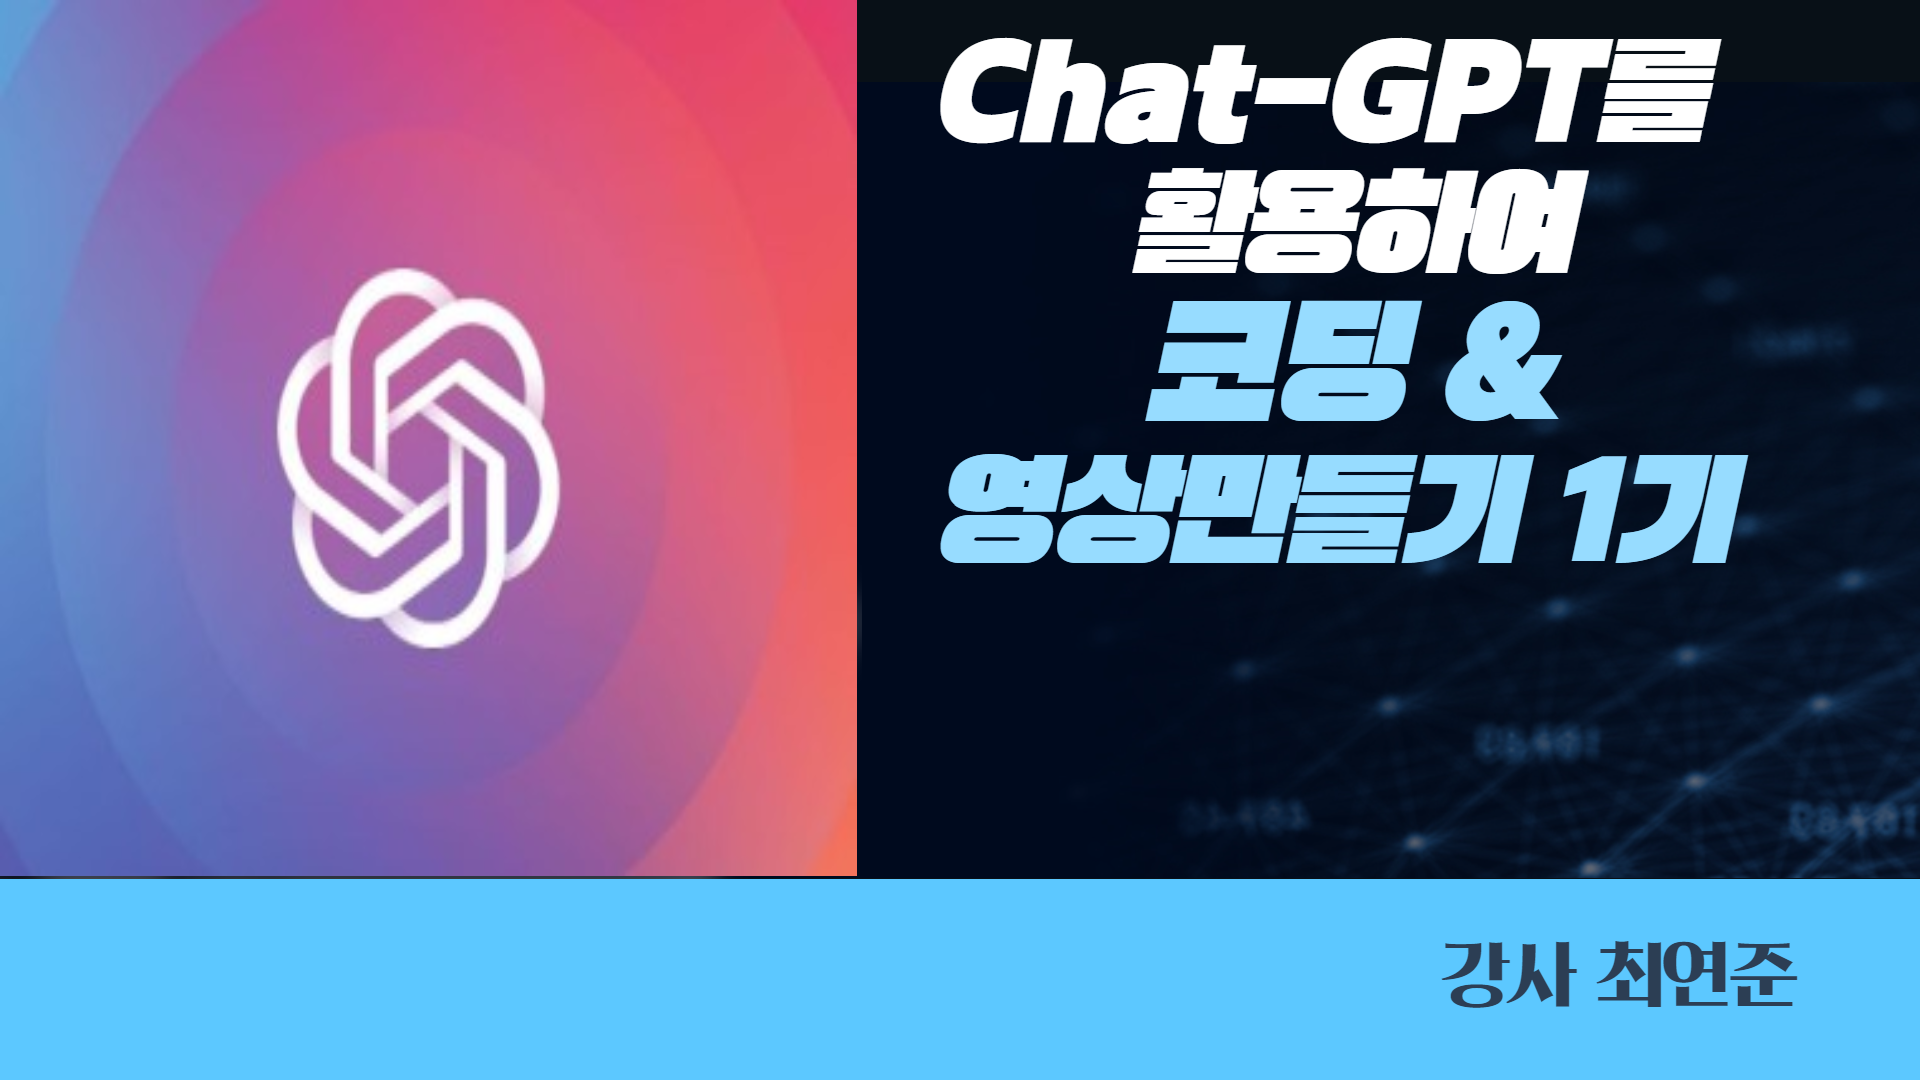 Chat GPT – Guide to Know More About This AI-Based Tool